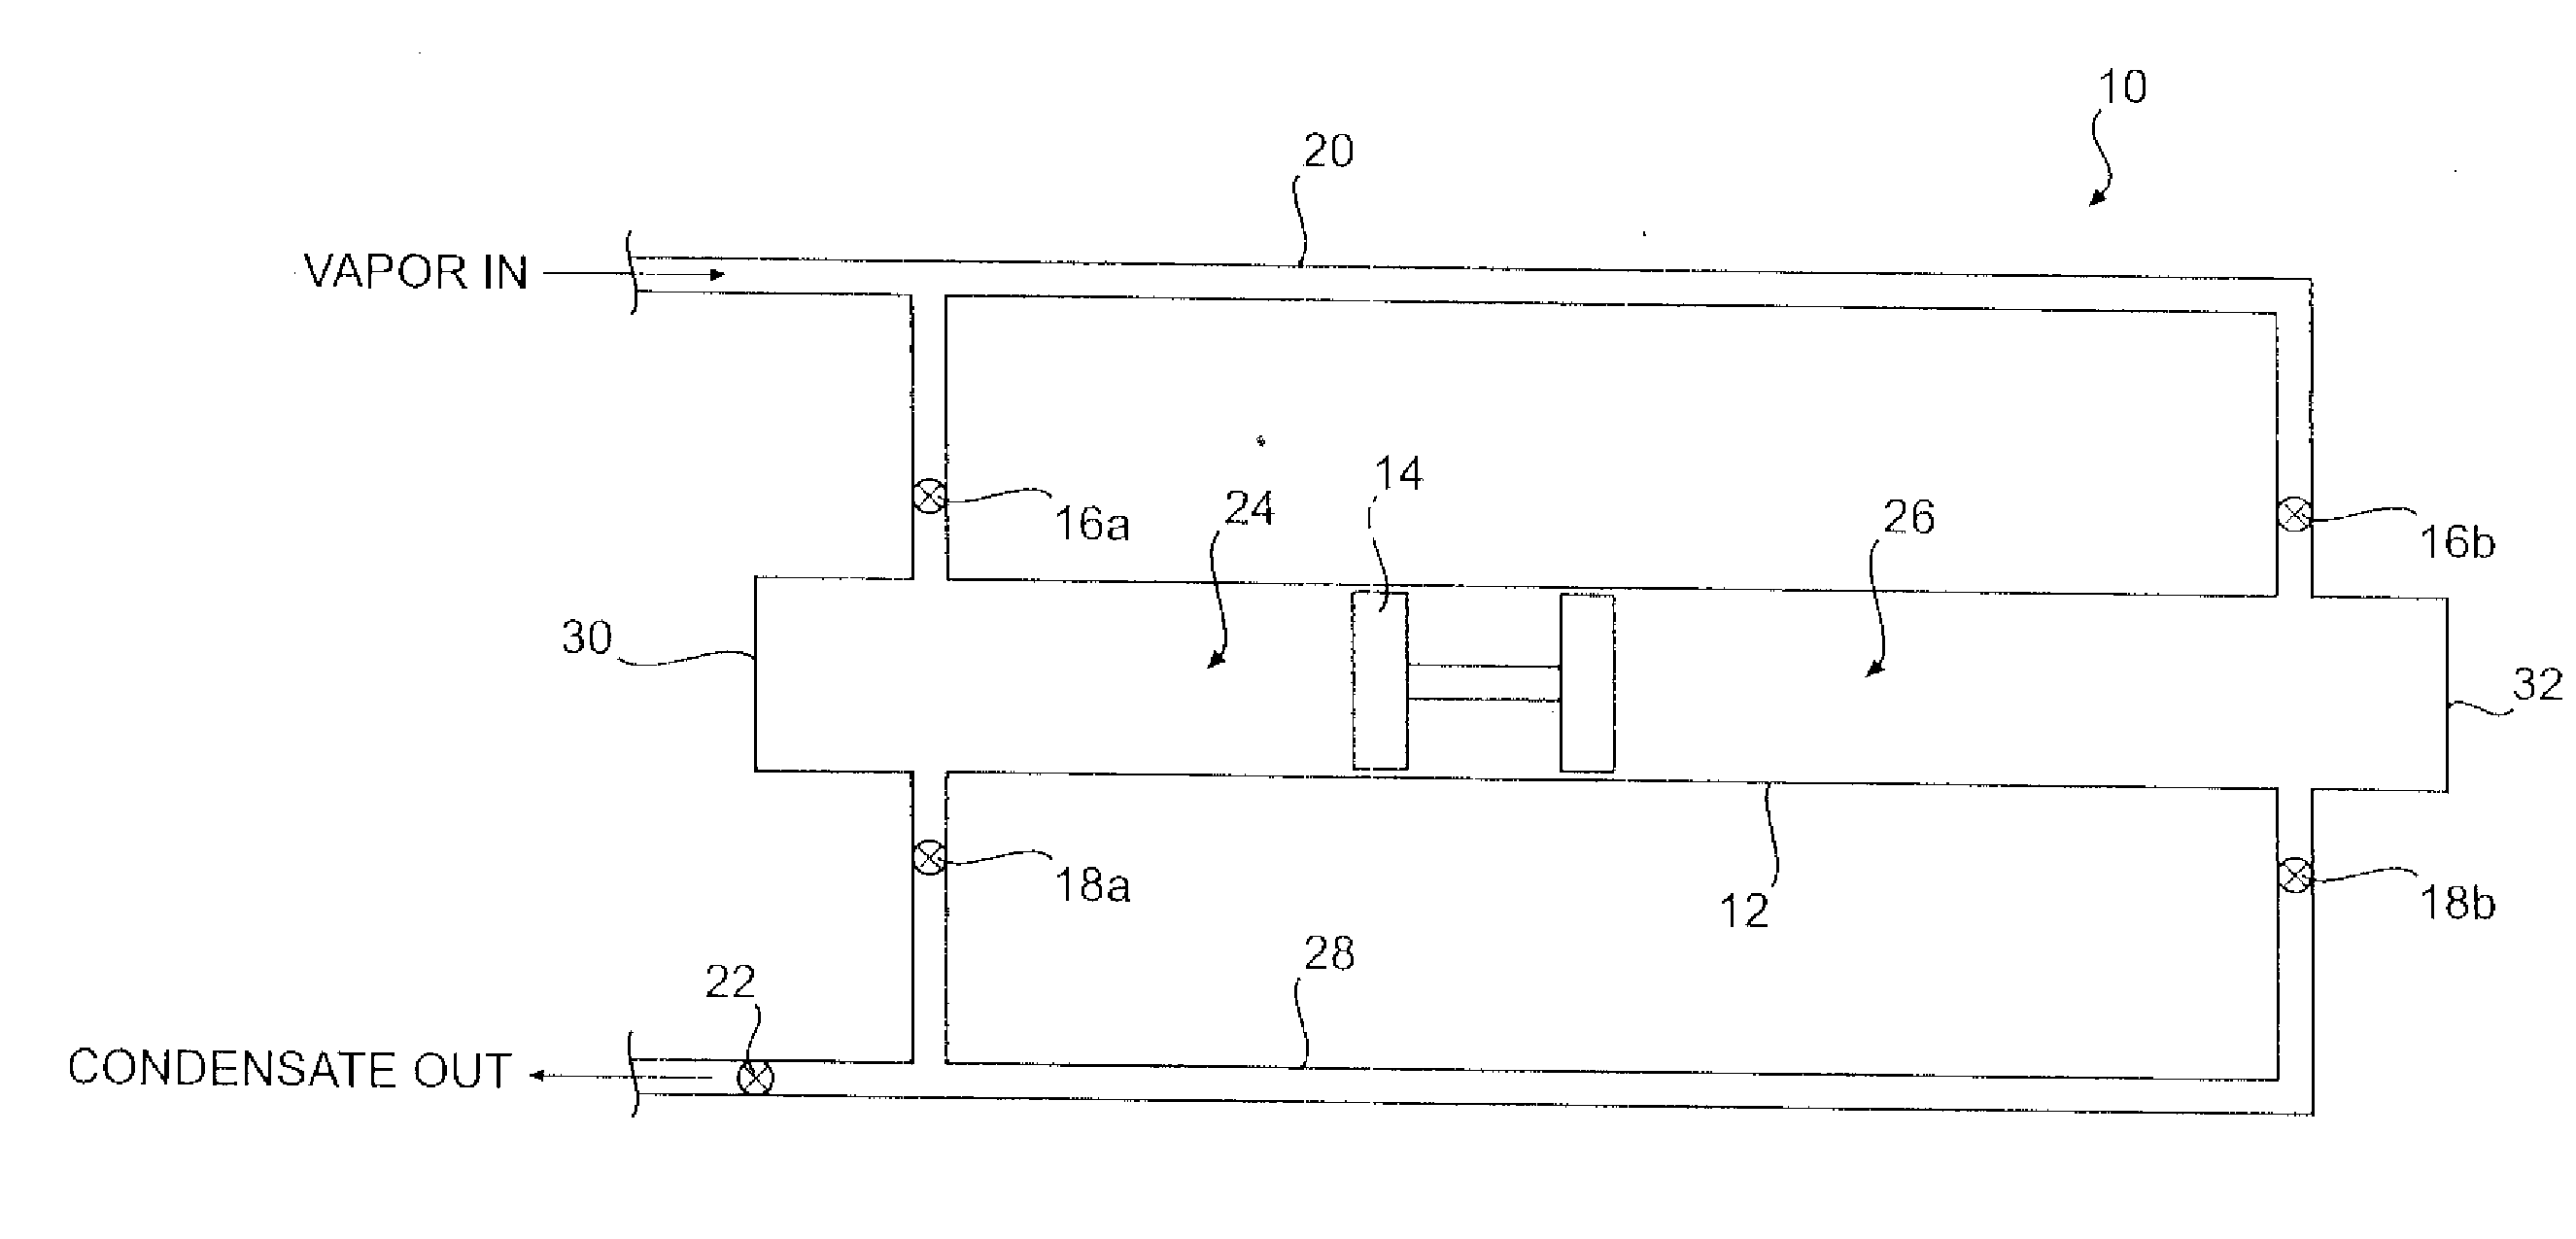 Open Loop Heat Pipe Radiator Having A Free-Piston For Wiping Condensed Working Fluid